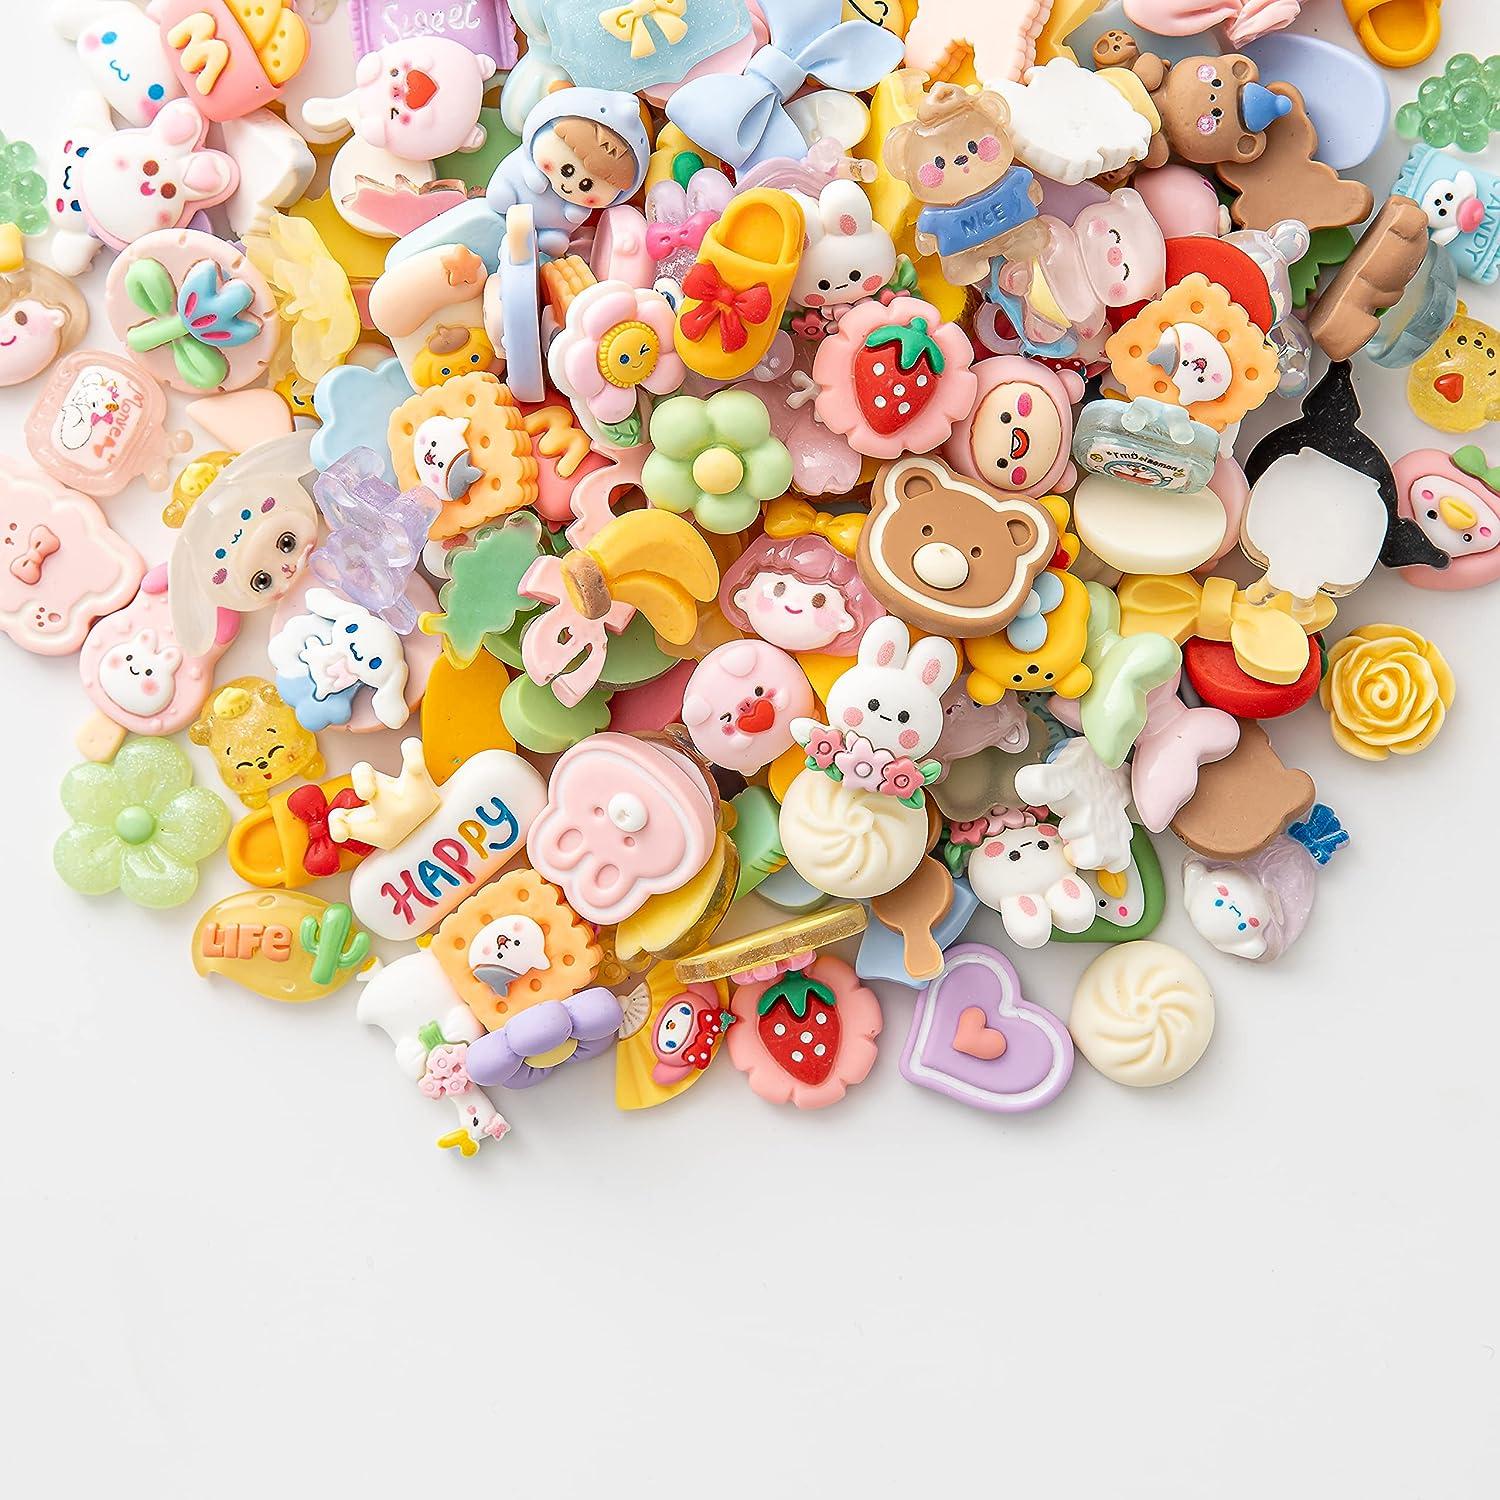 Slime Charms Cartoons Charms Cute Set - Mixed Lot Assorted